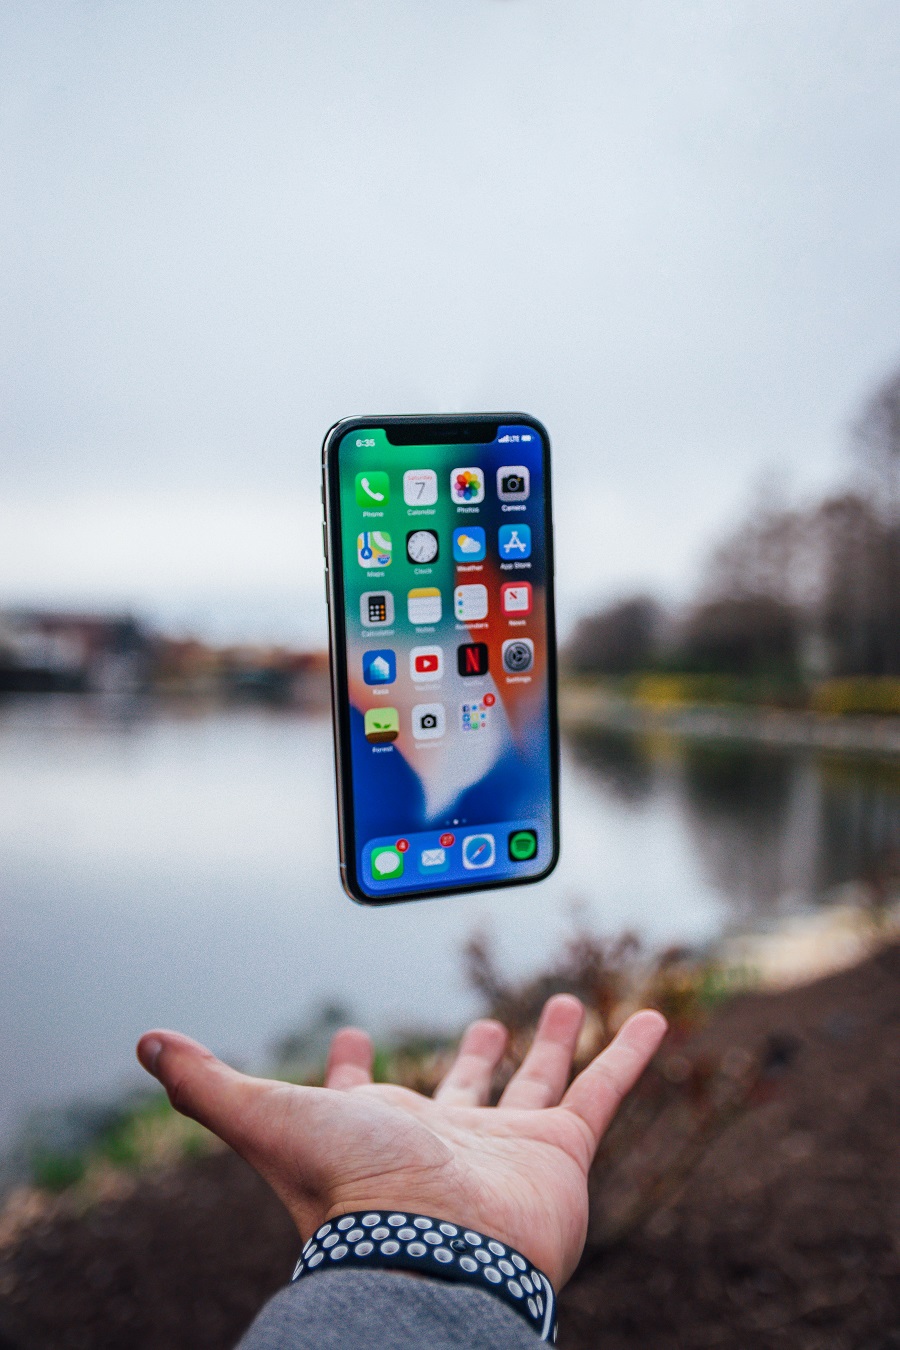  How long is the iPhone 13 pro expected to last?